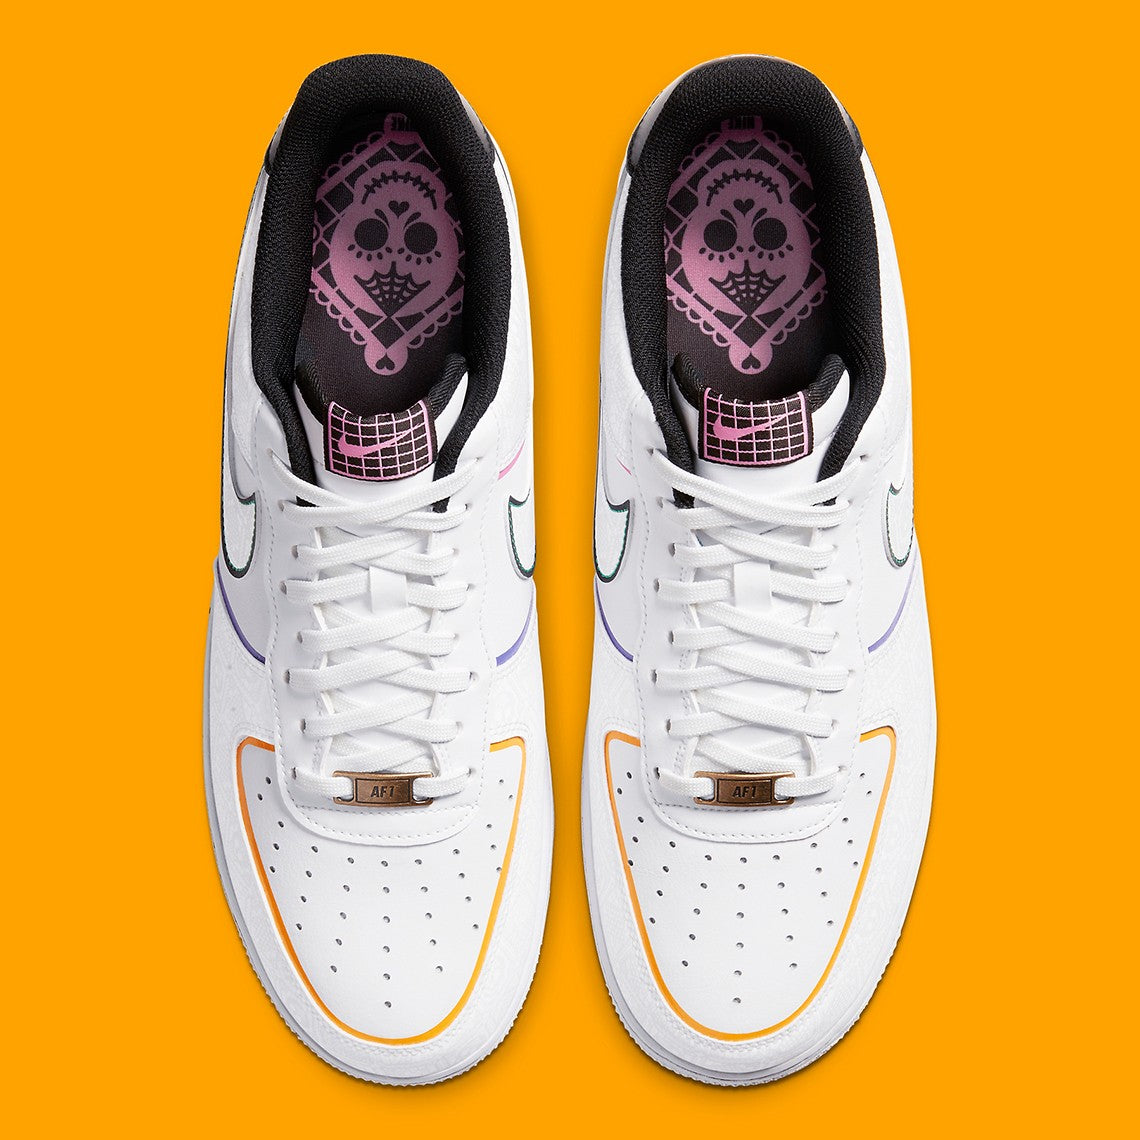 Air Force 1 "Day of the death" (2019)